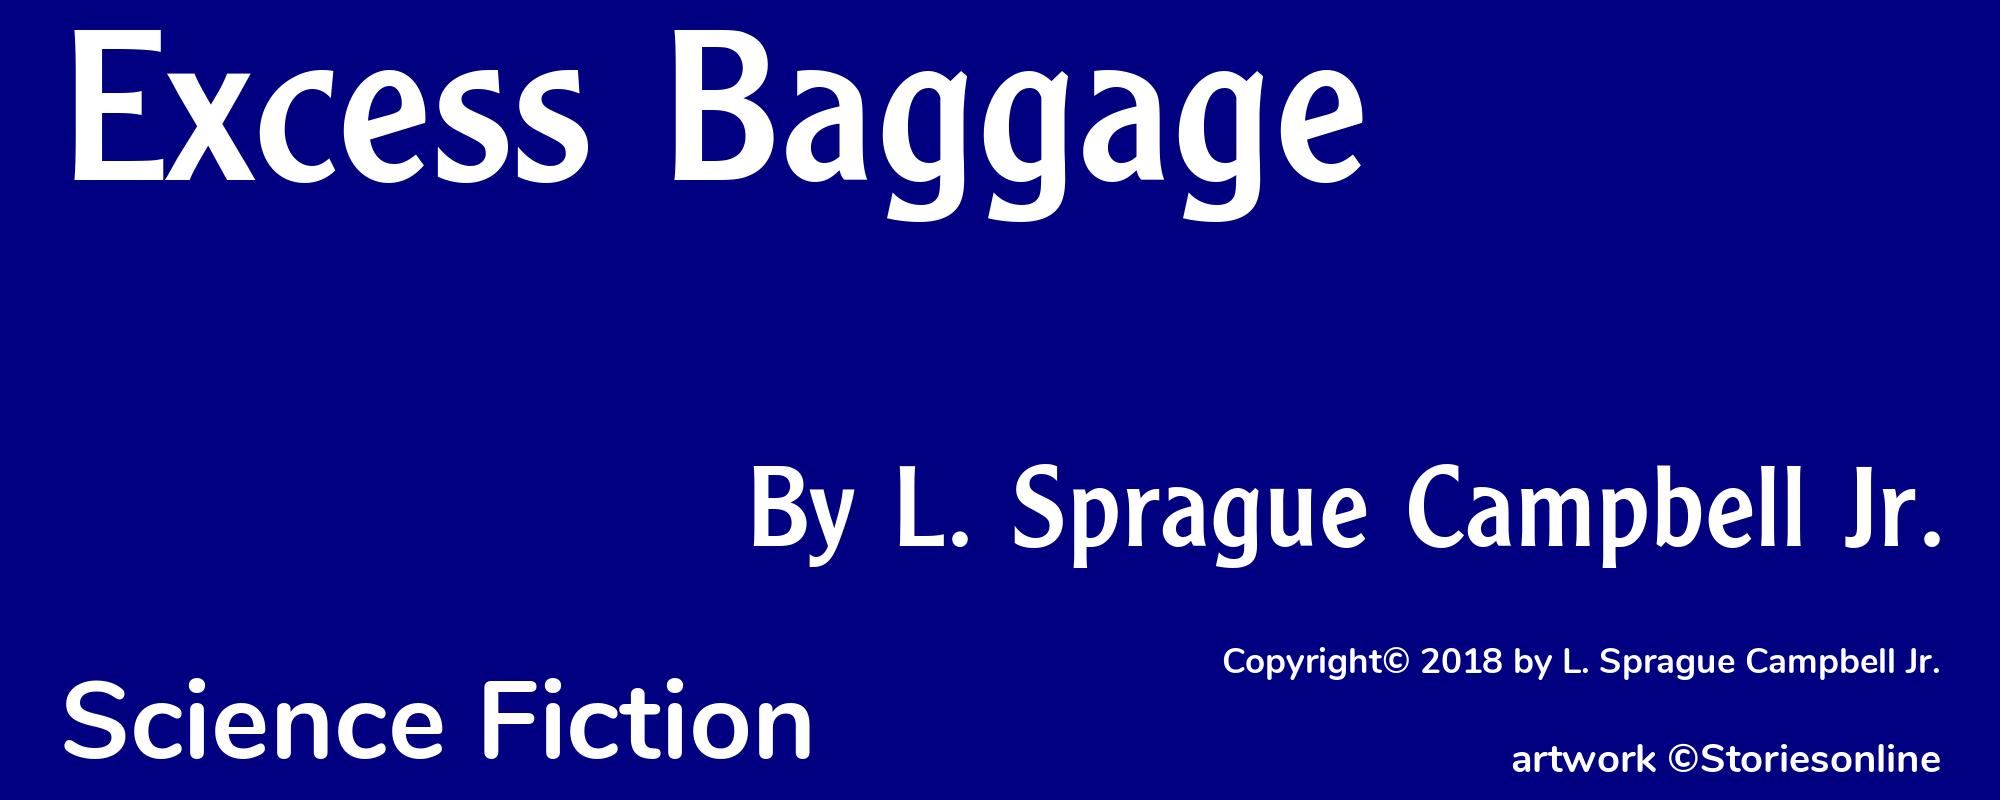 Excess Baggage - Cover